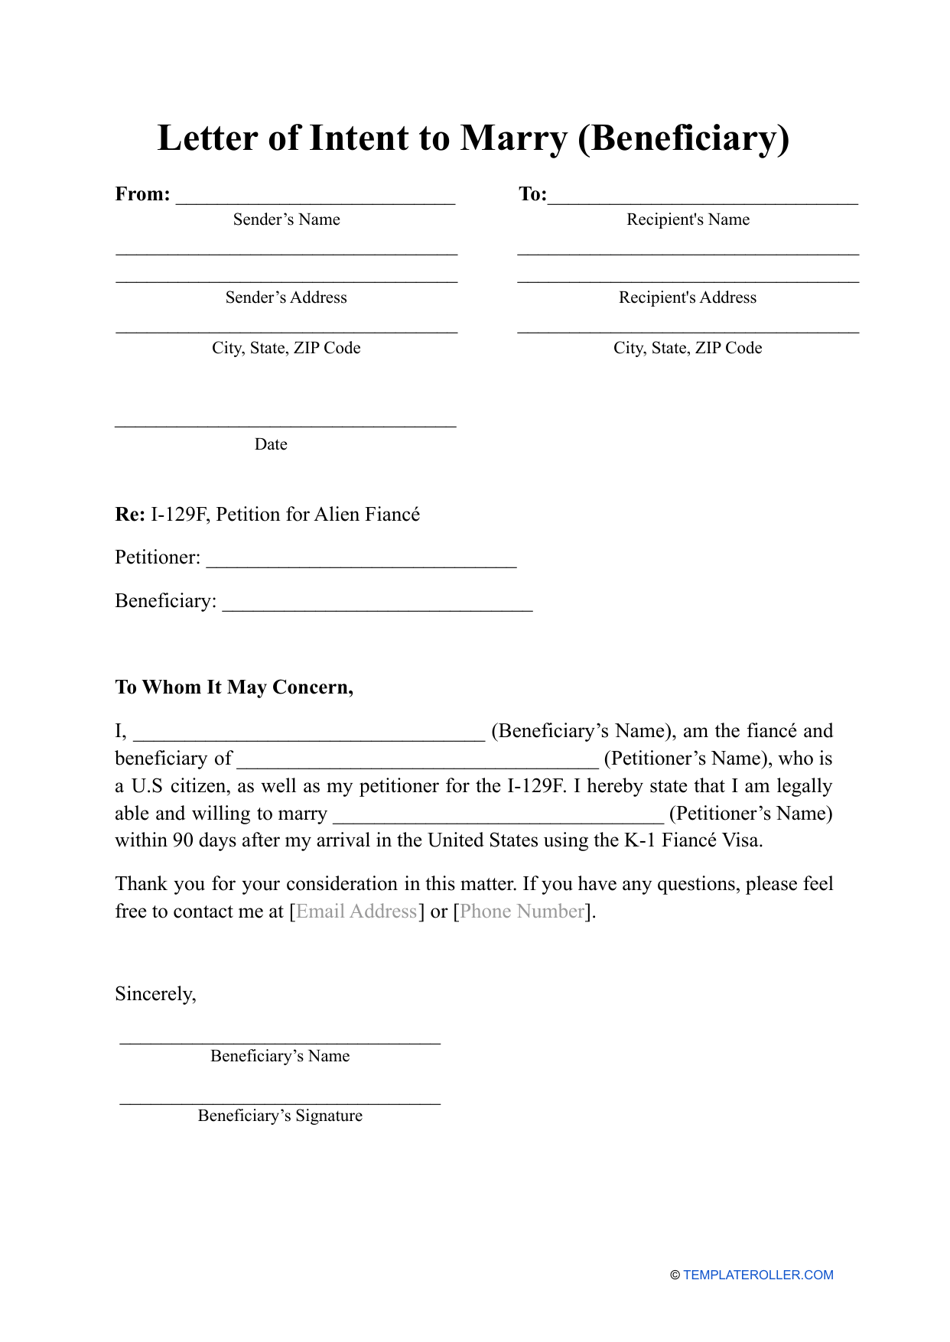 letter-of-intent-to-marry-beneficiary-download-printable-pdf